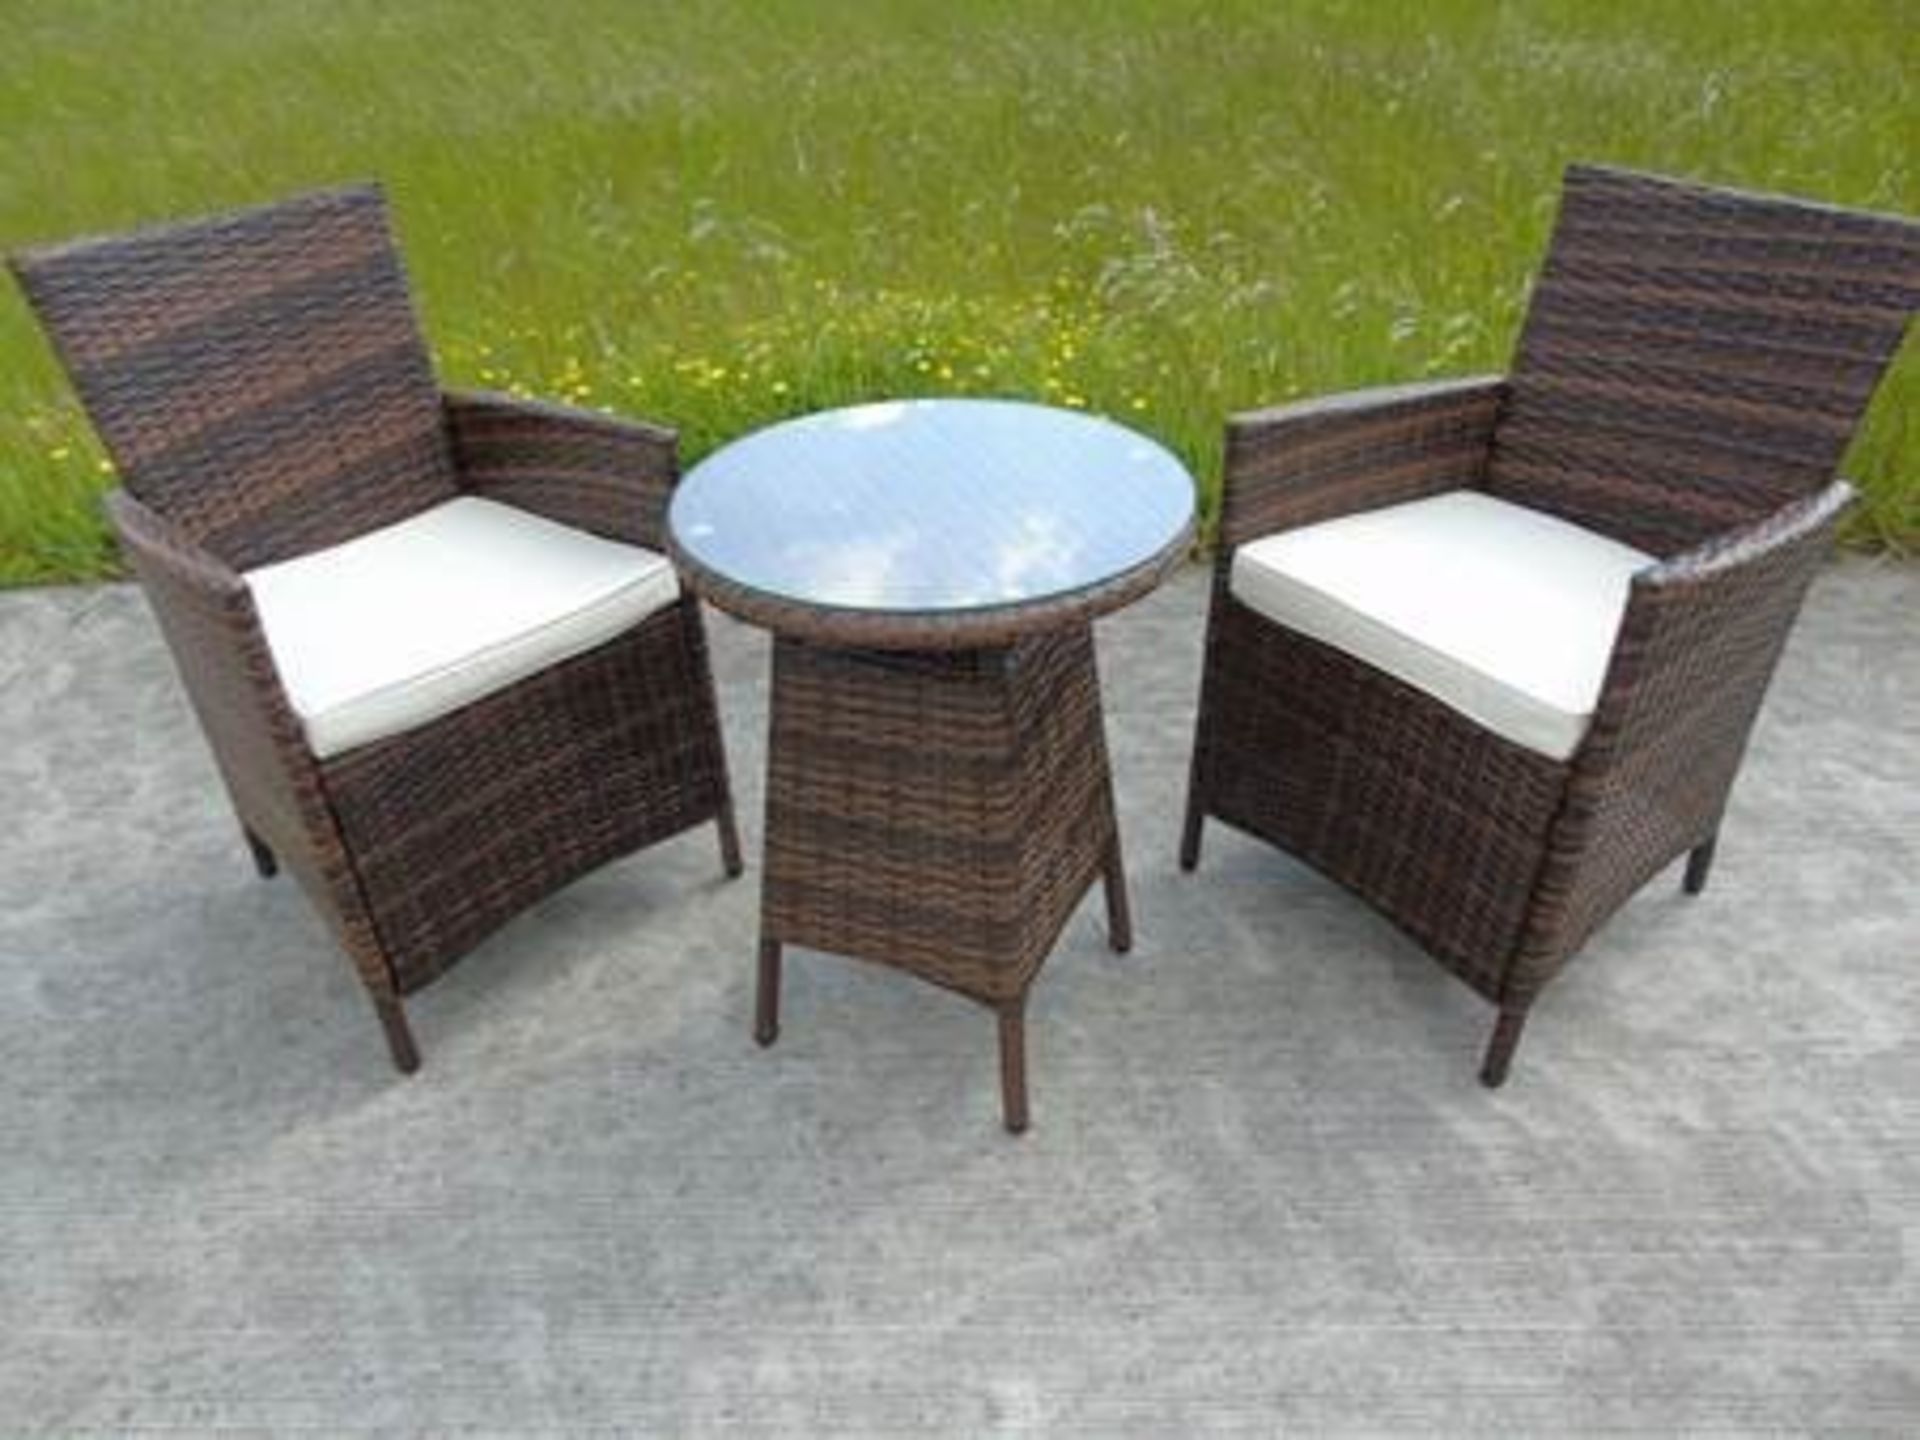 + VAT Brand New Chelsea Garden Company Two Person Table & Chair Set - Light Brown Rattan With Ivory